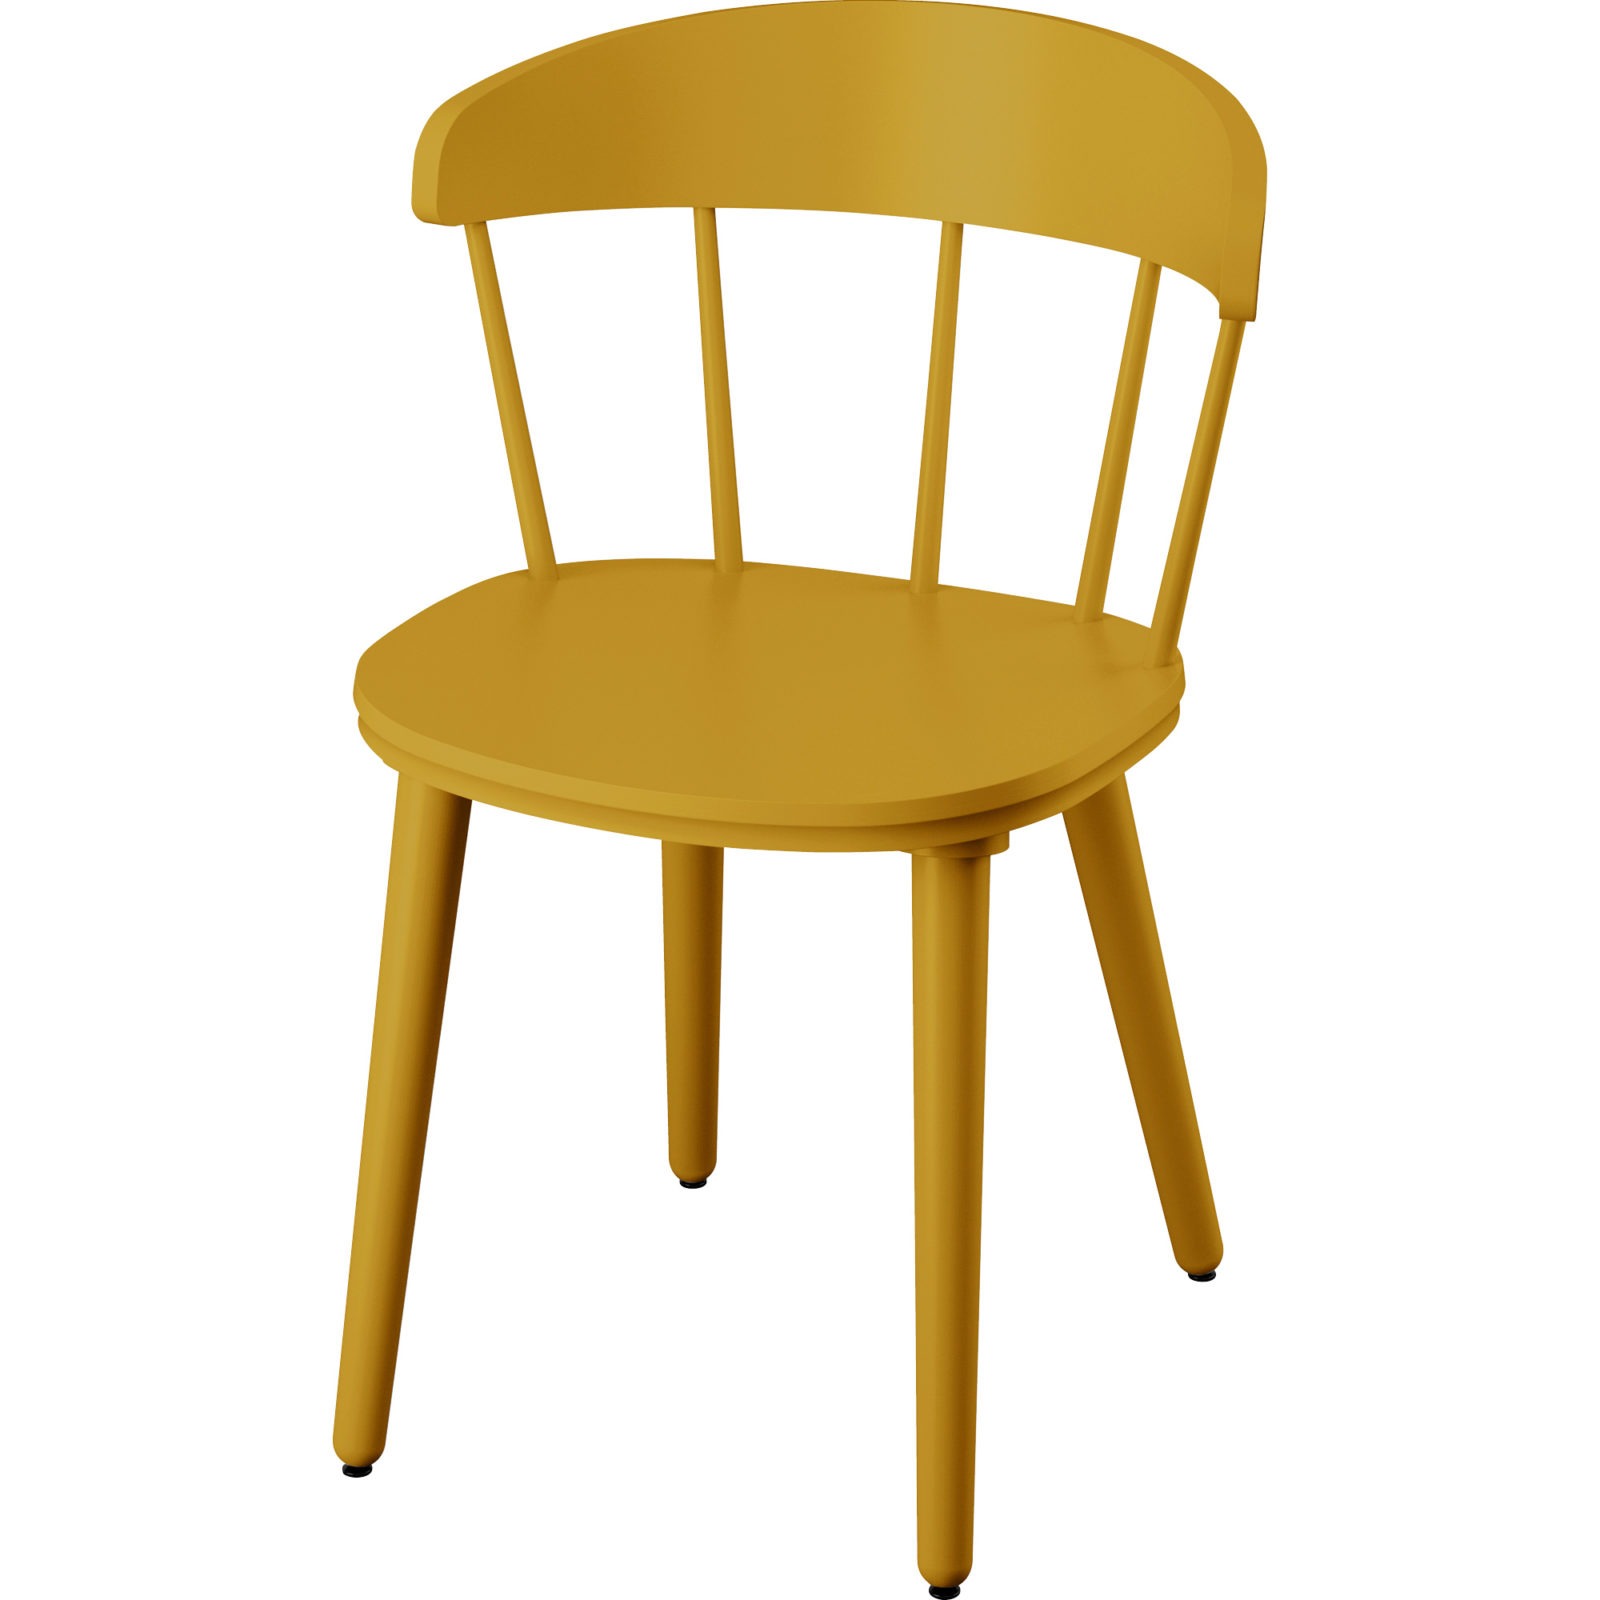 Yellow chair with a high, wide back to provide good support, OMTÄNKSAM.